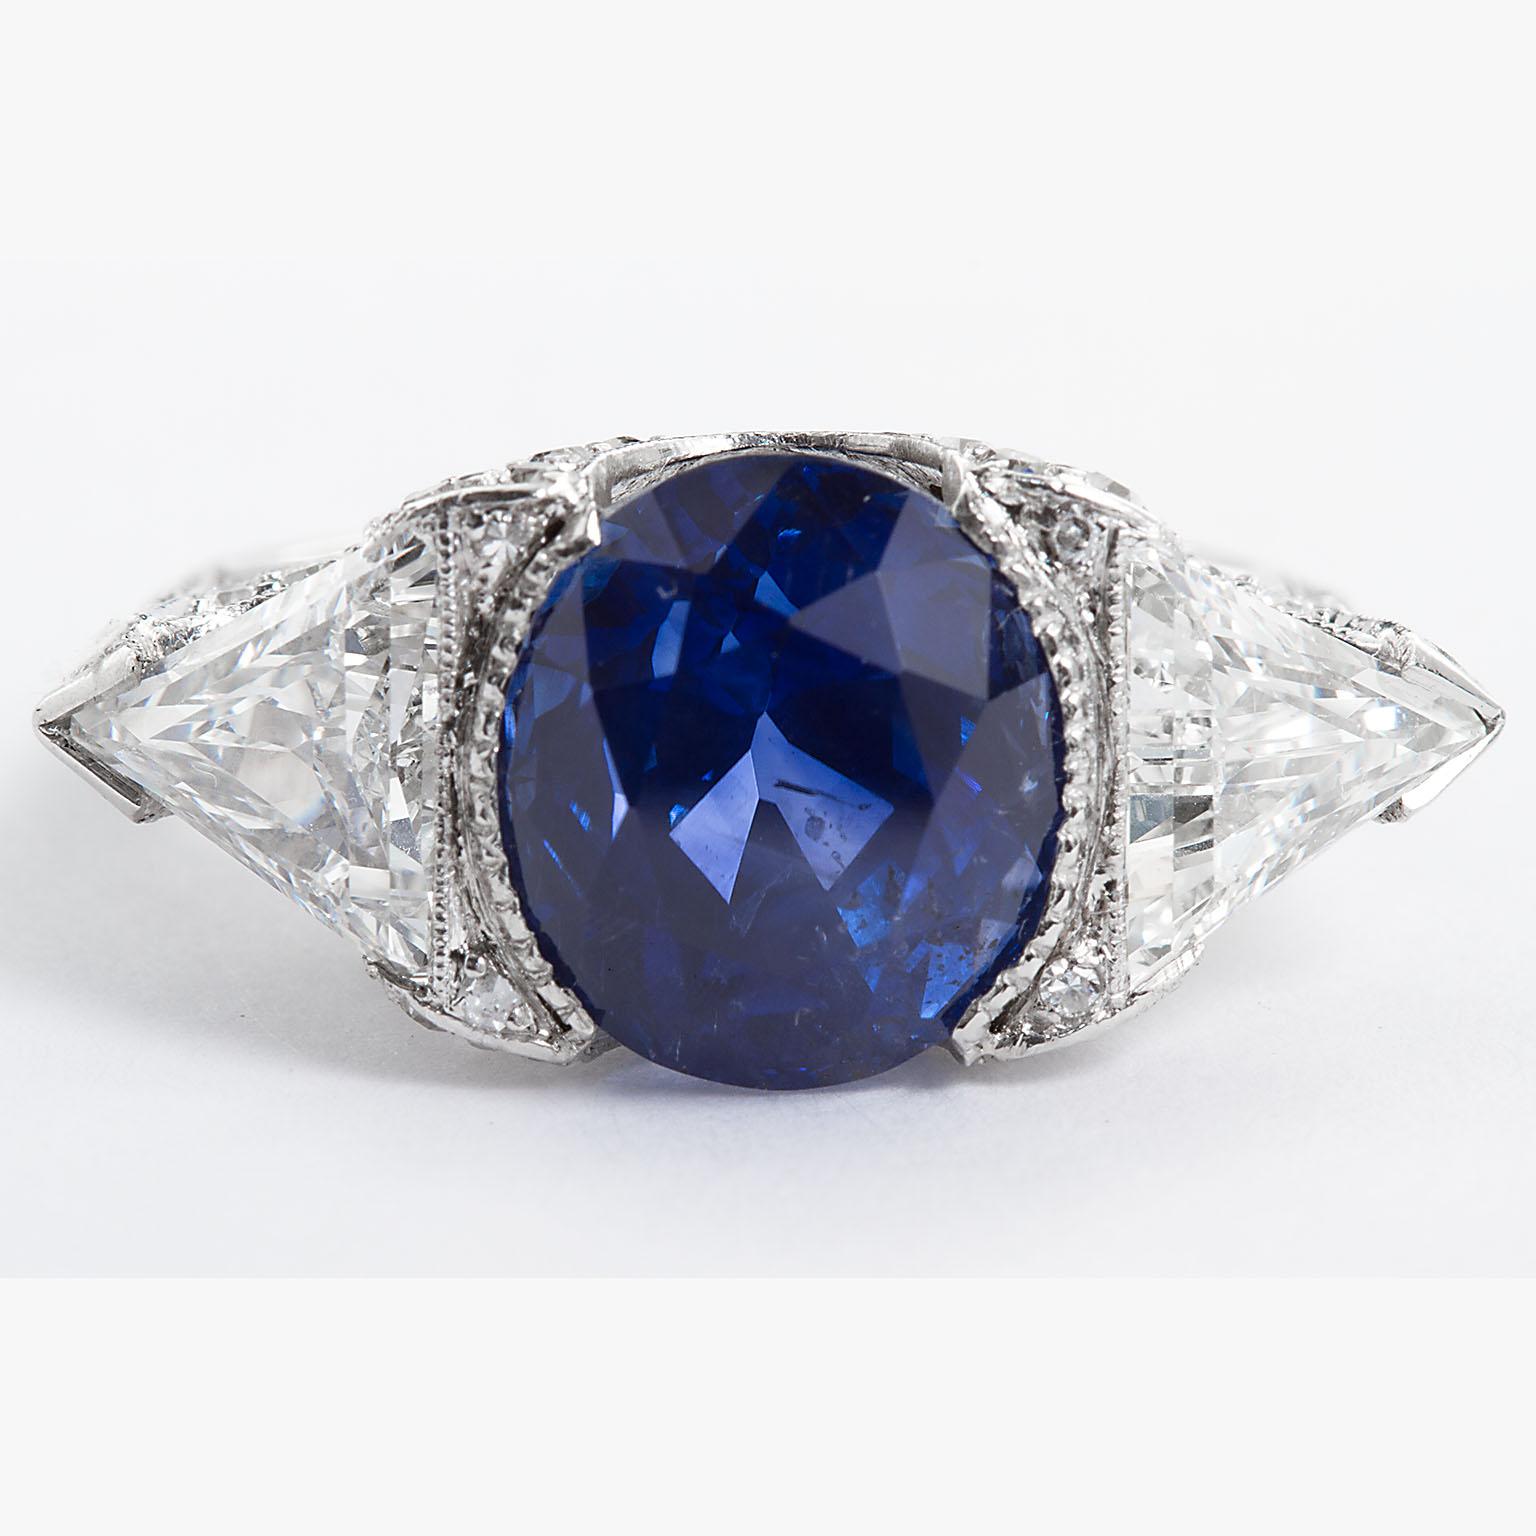 A remarkably dignified oval shape Ceylon sapphire and diamond ring.  Center sapphire is 6.26 carats and Unheated. It's set between two triangle shape diamonds of high color and clarity, 2.08 ctw, in a handsome diamond mellee (1.00 ctw) and